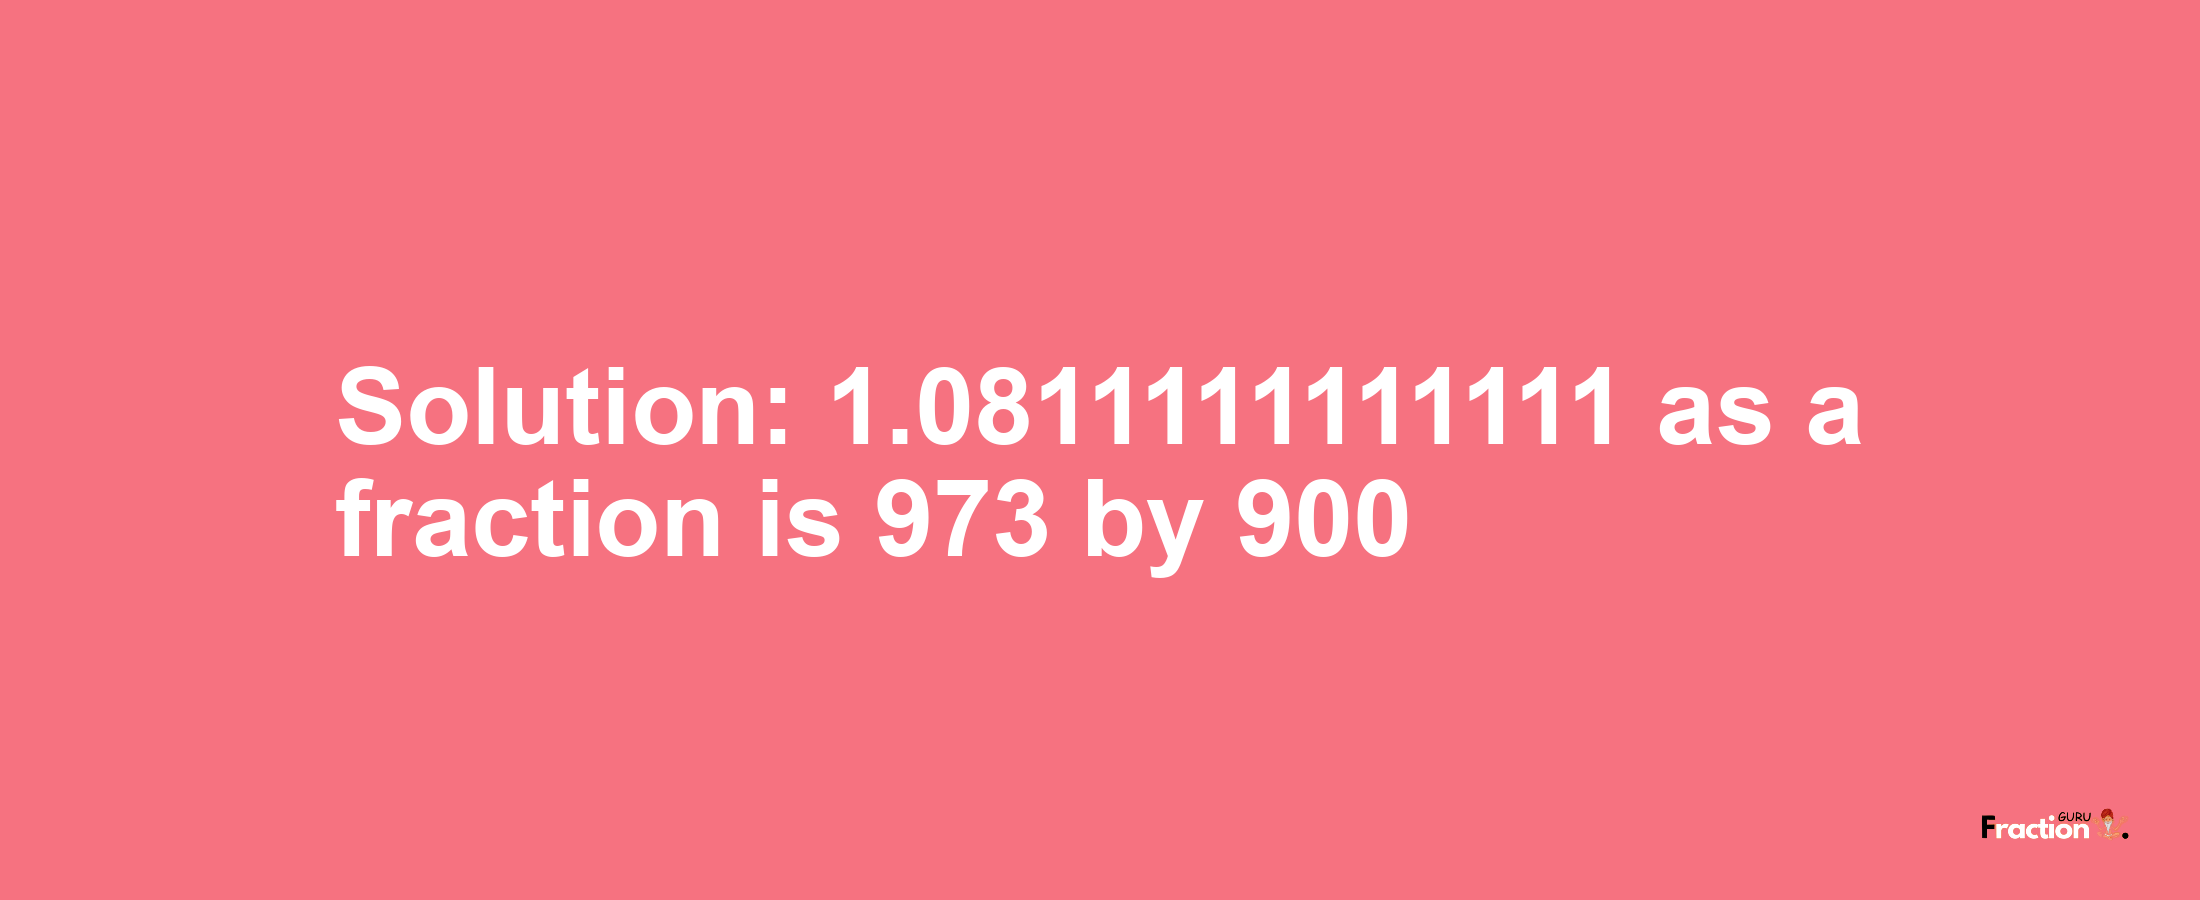 Solution:1.0811111111111 as a fraction is 973/900